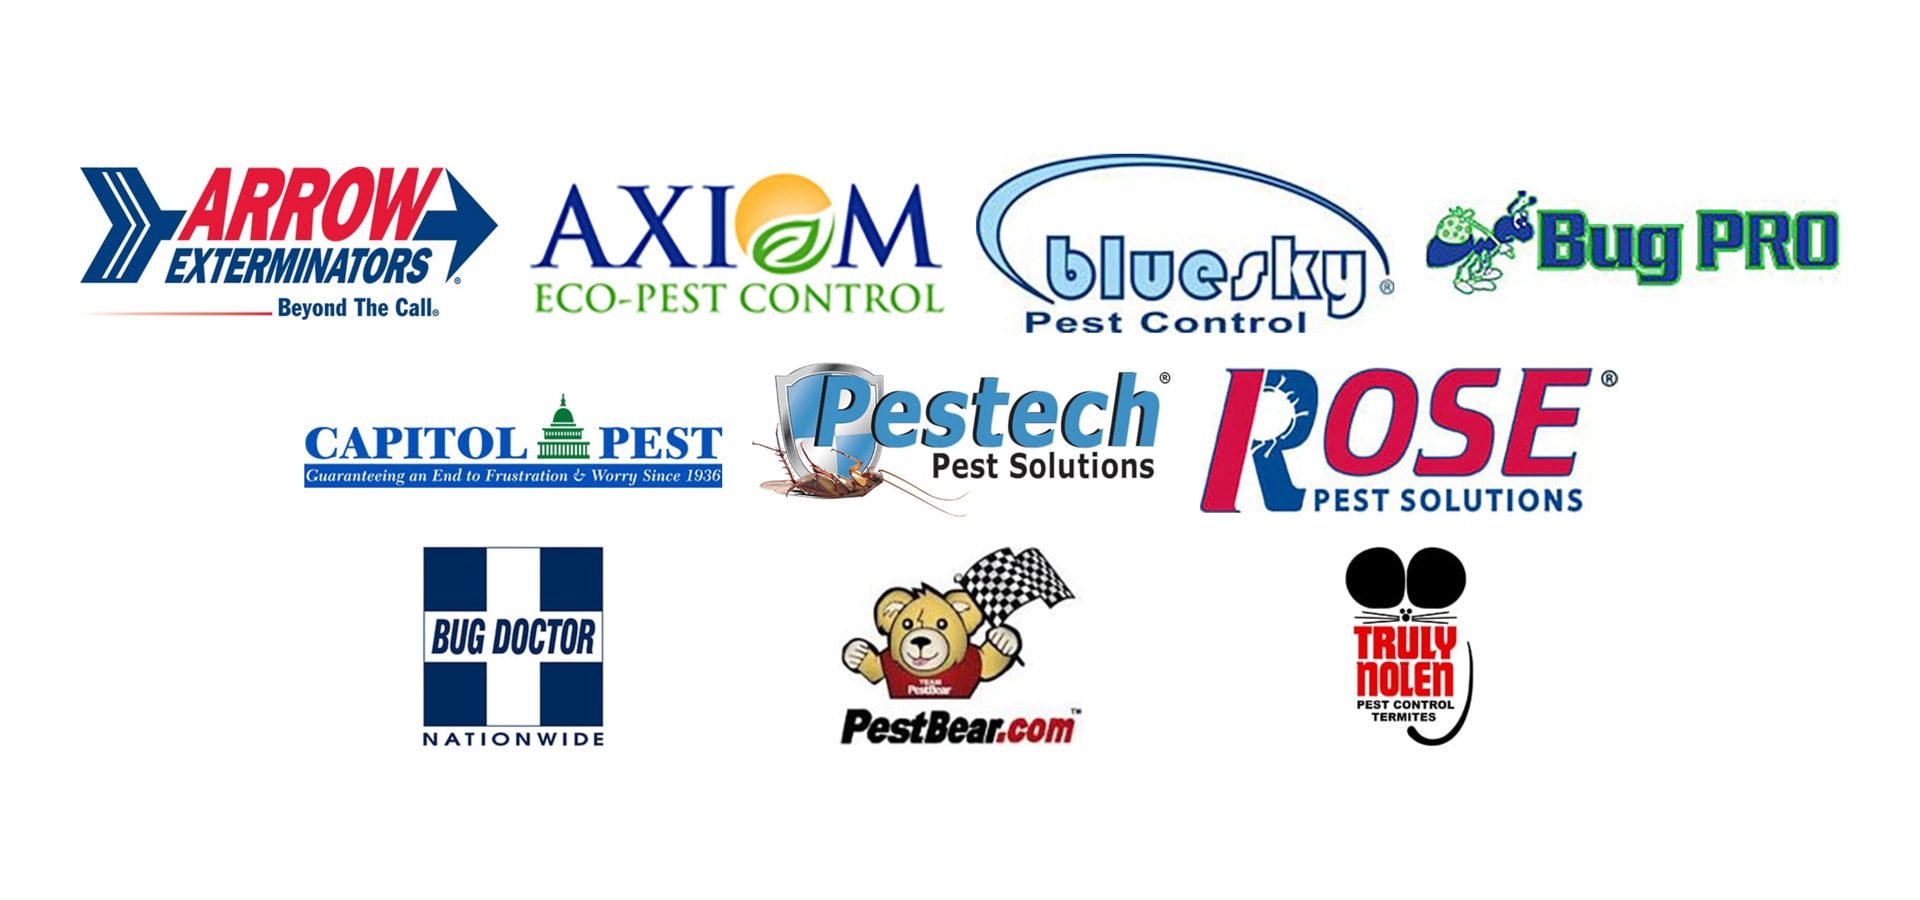 Pest control fleet management provided to companies across the nation